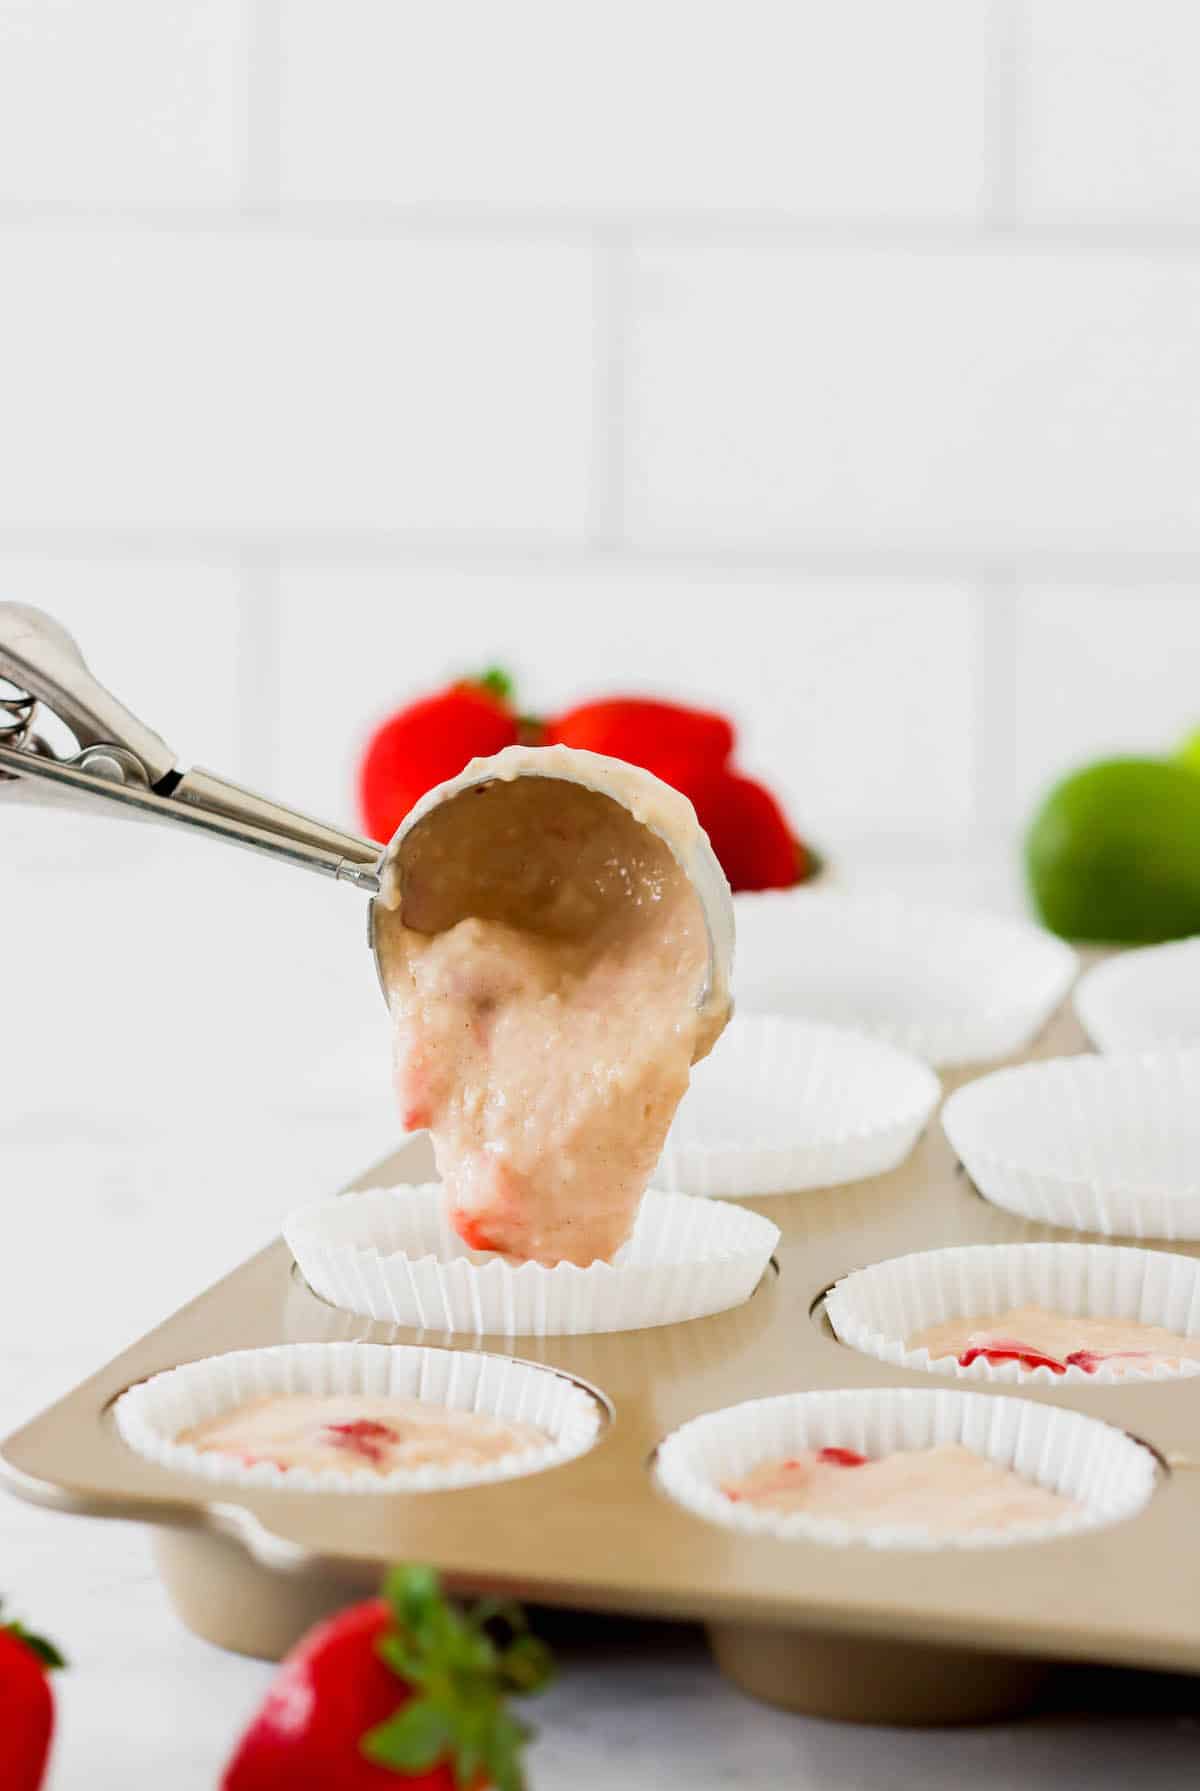 Muffin batter being scooped into a muffin tin